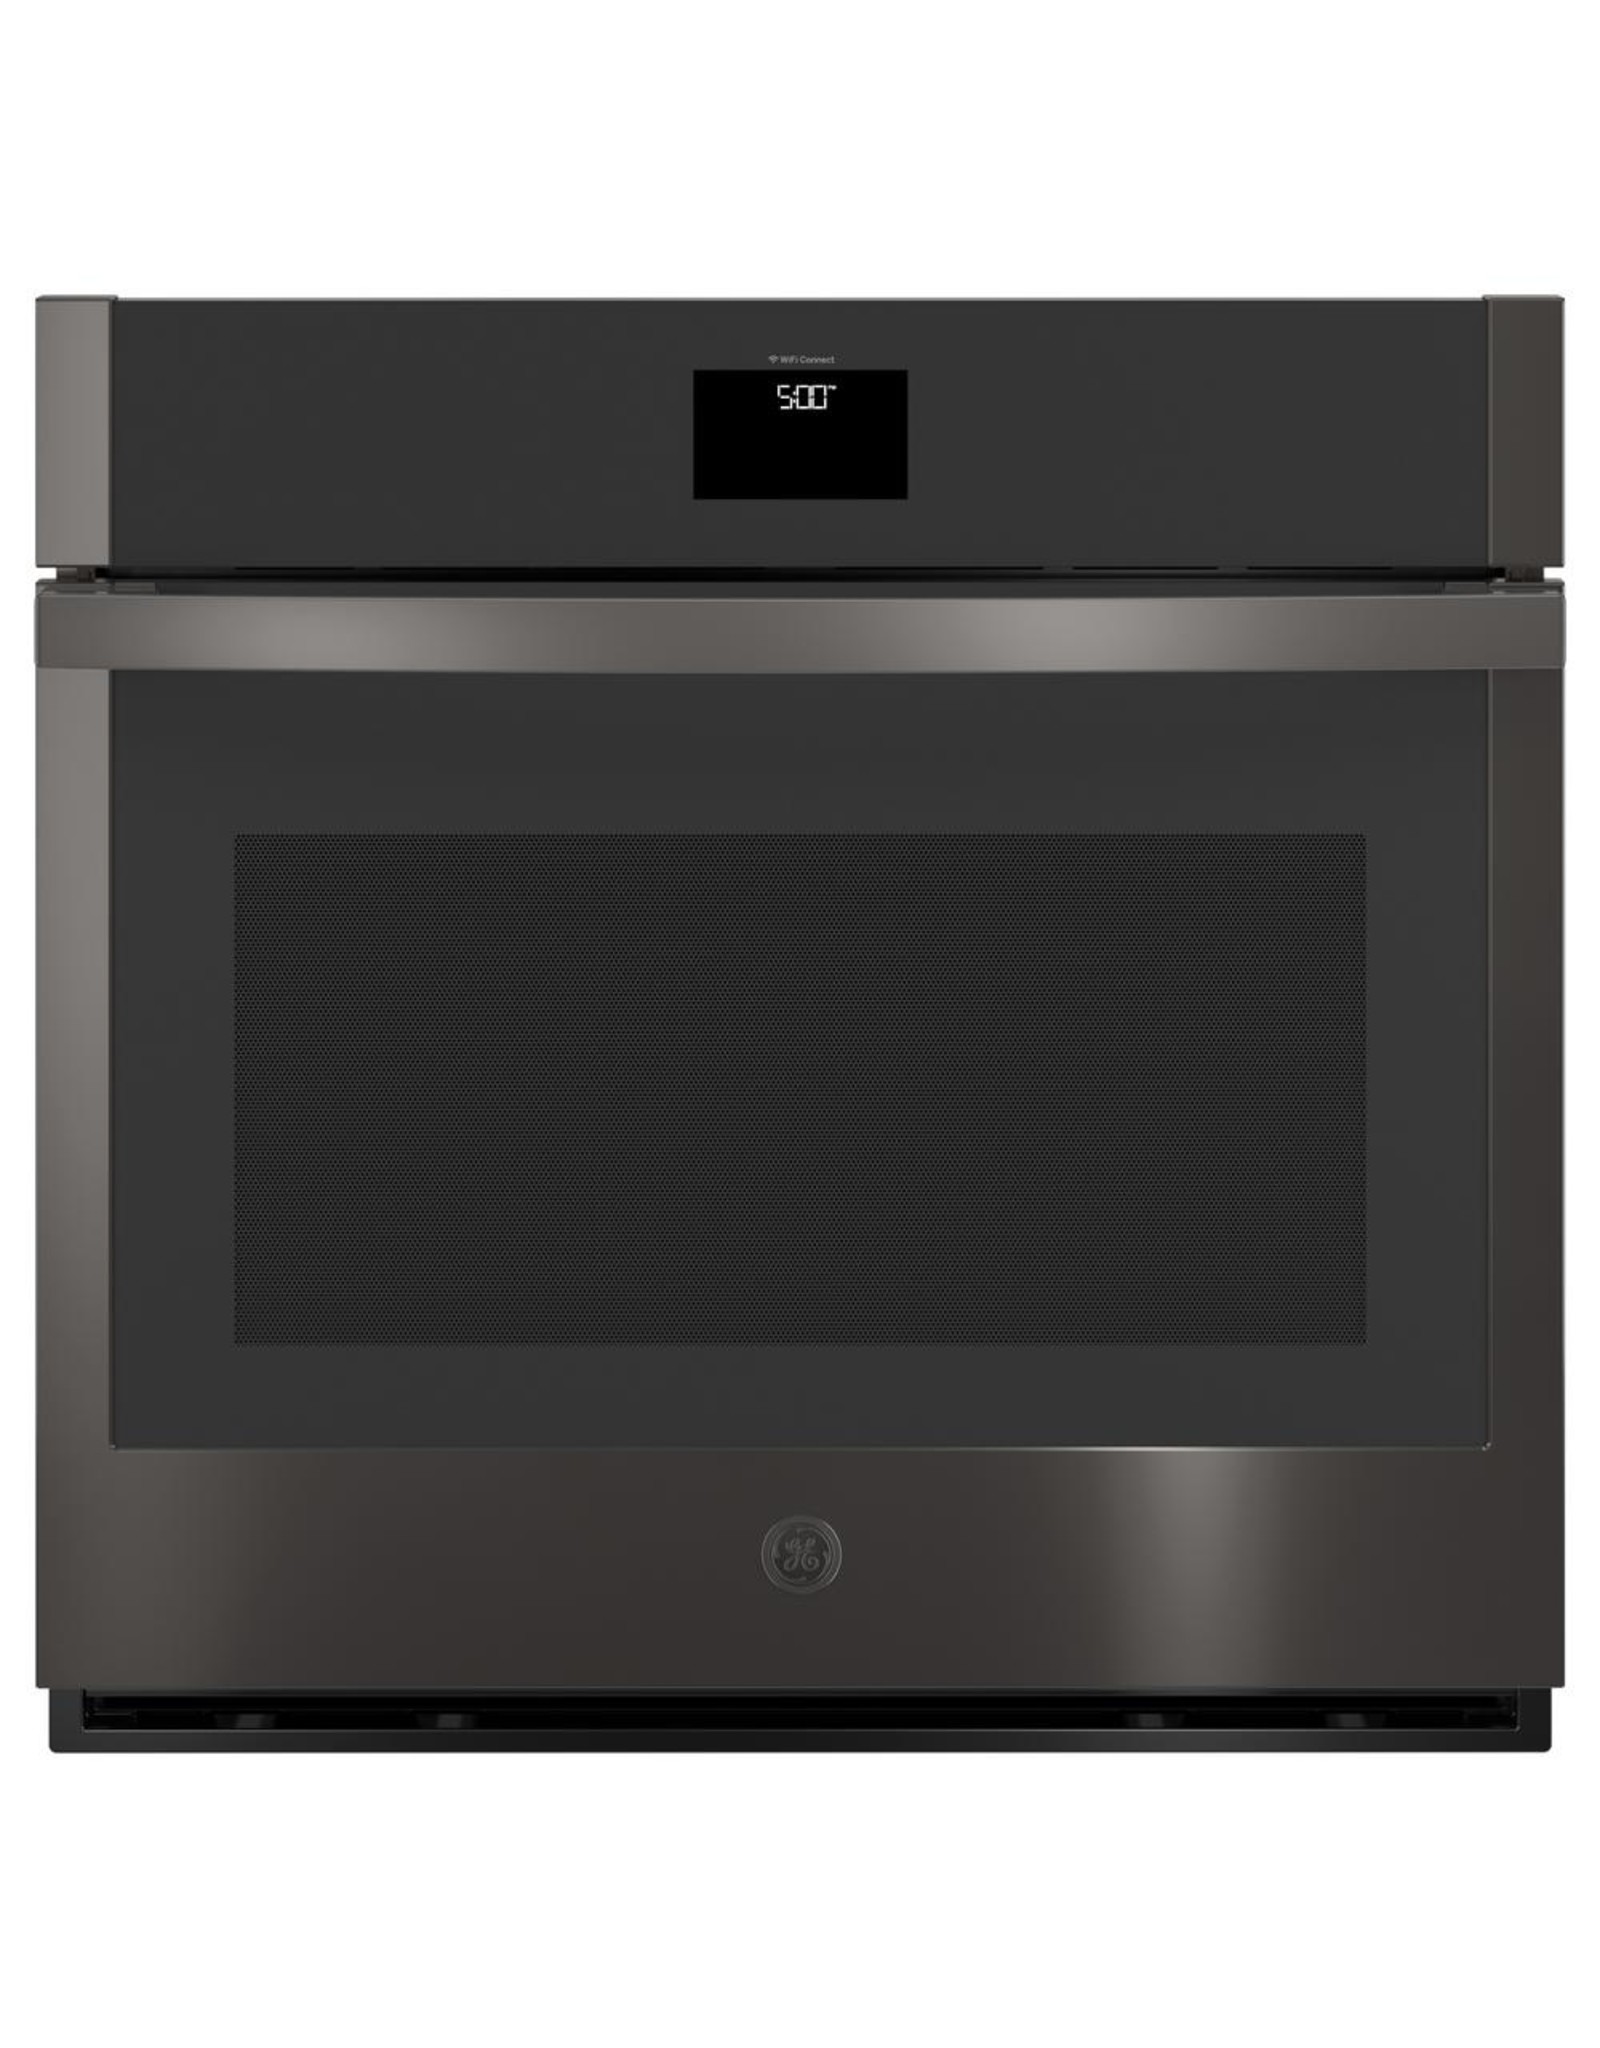 GE JTS5000BNTS 30 in. 5 cu. ft. Smart Single Electric Wall Oven with Convection Self-Cleaning in Black Stainless Steel